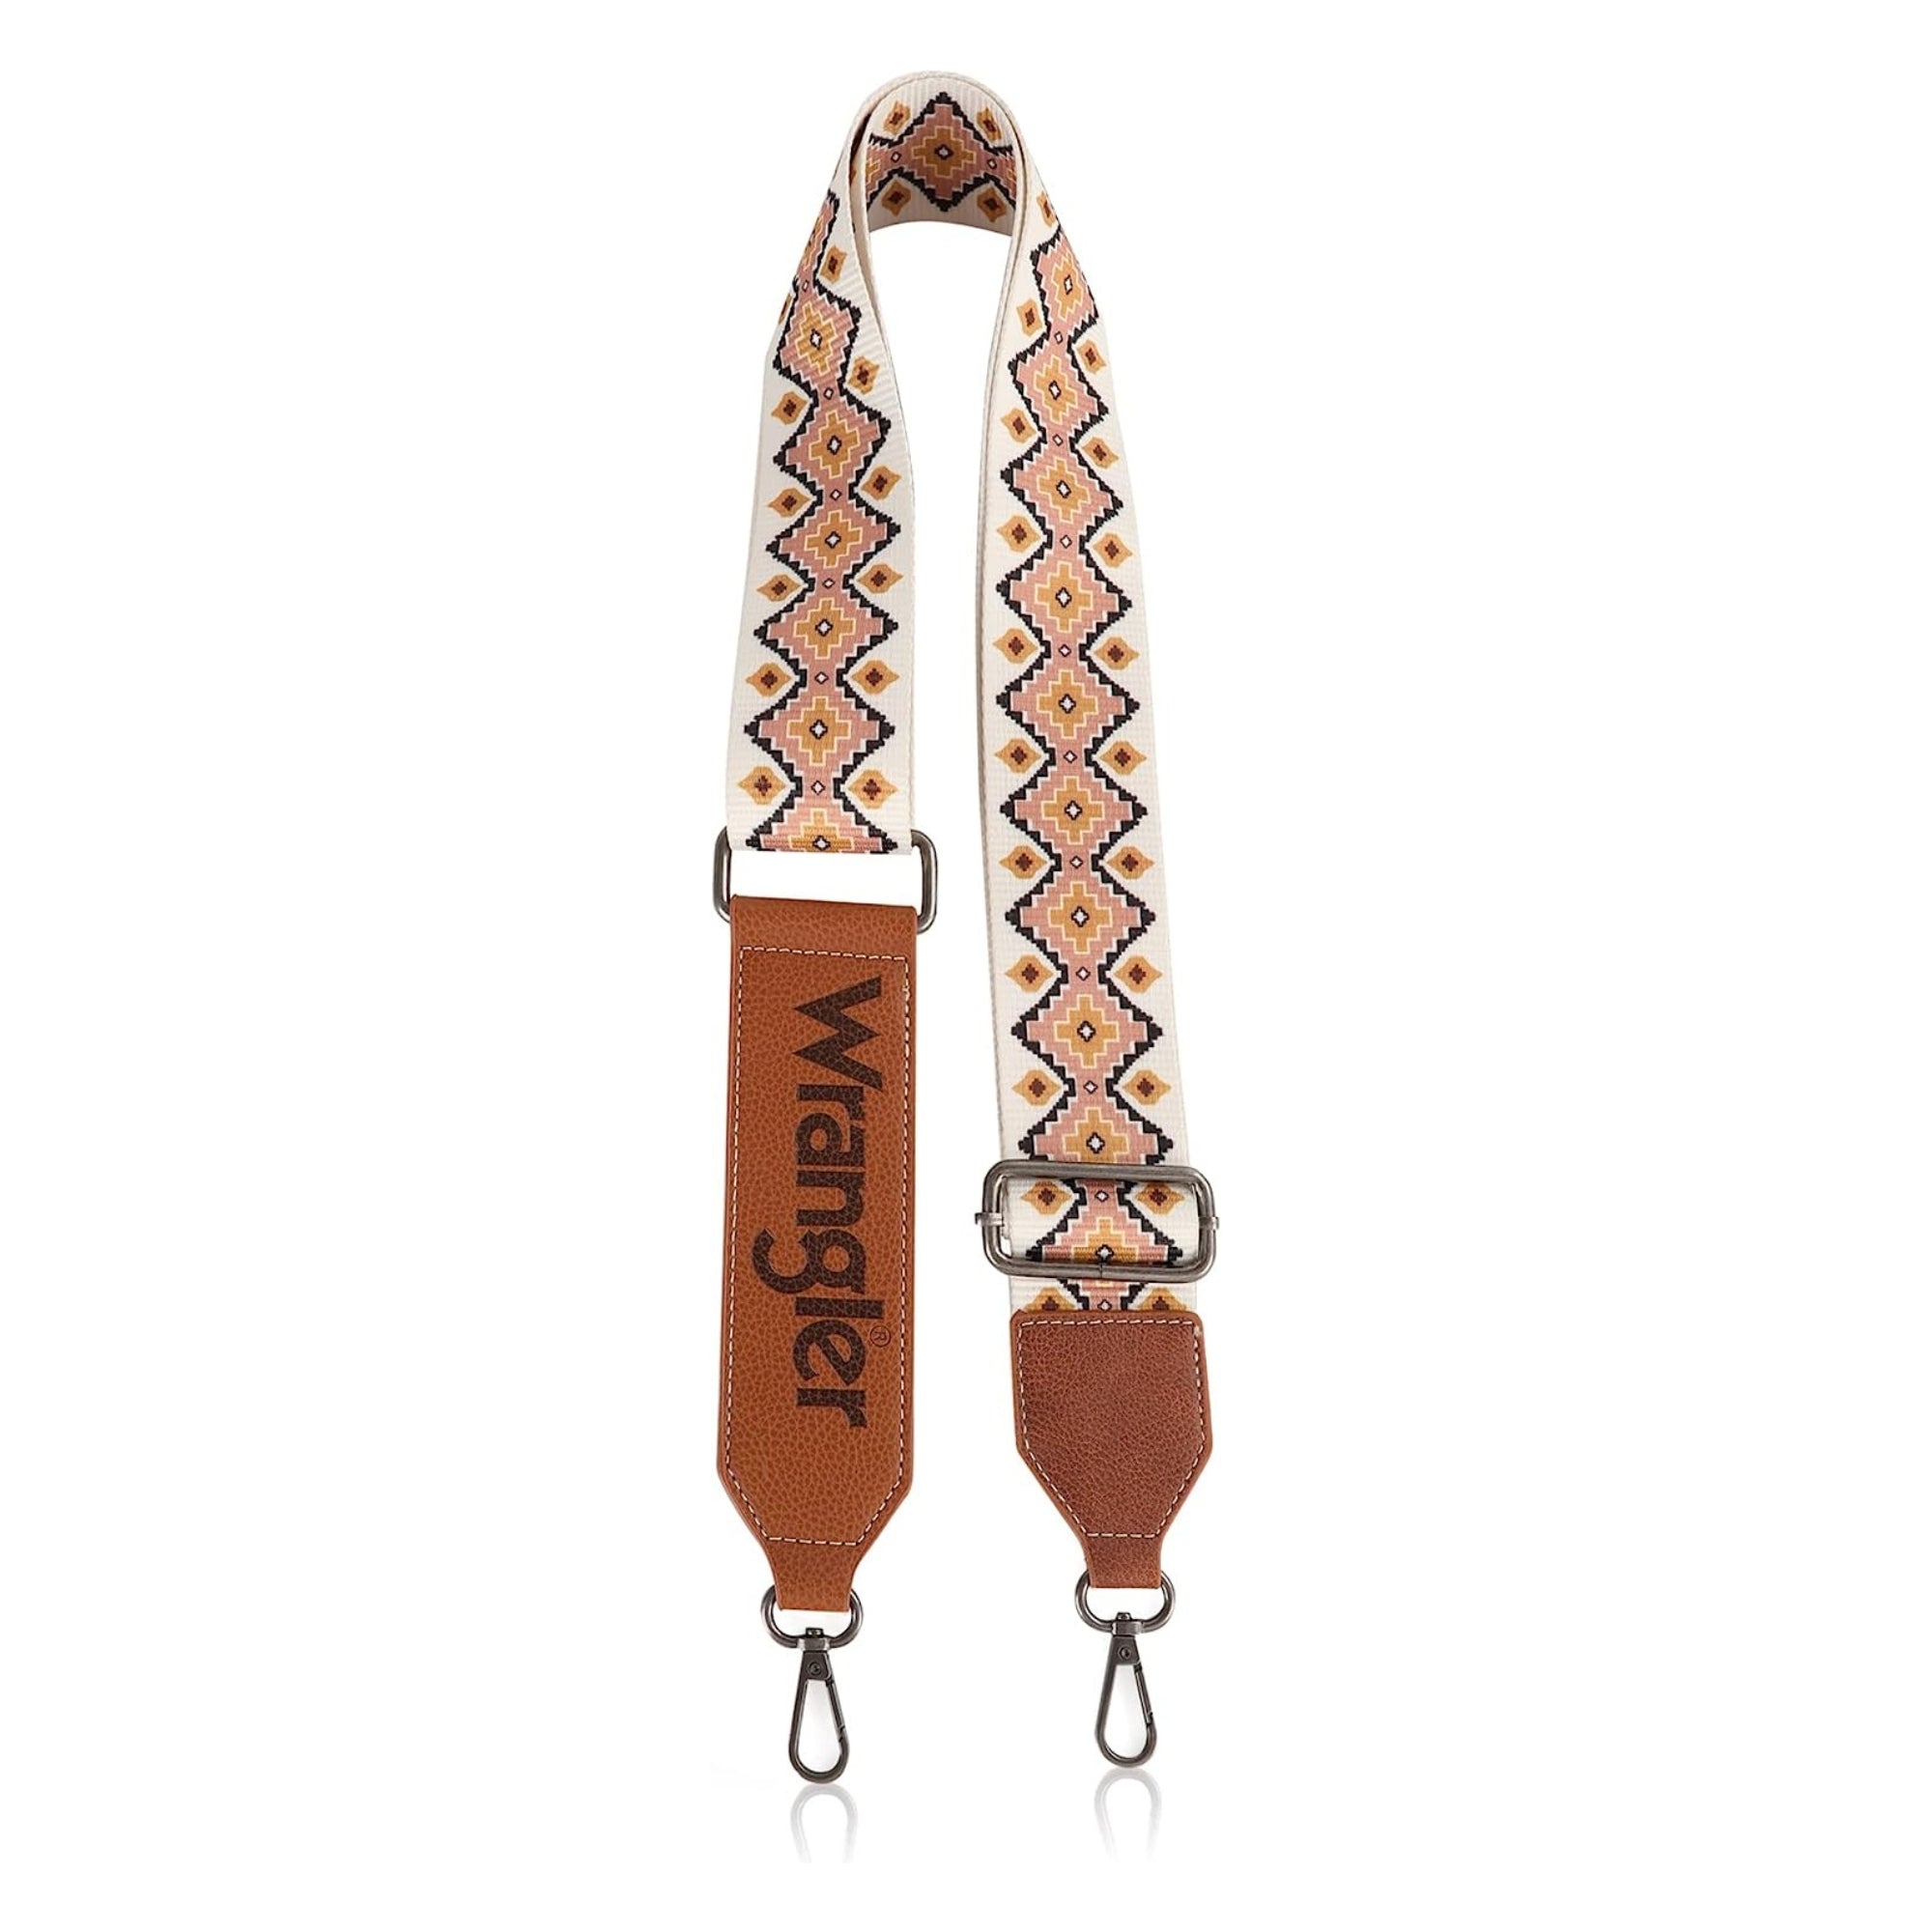 The BEST Guitar Straps for Your Bags Right Now